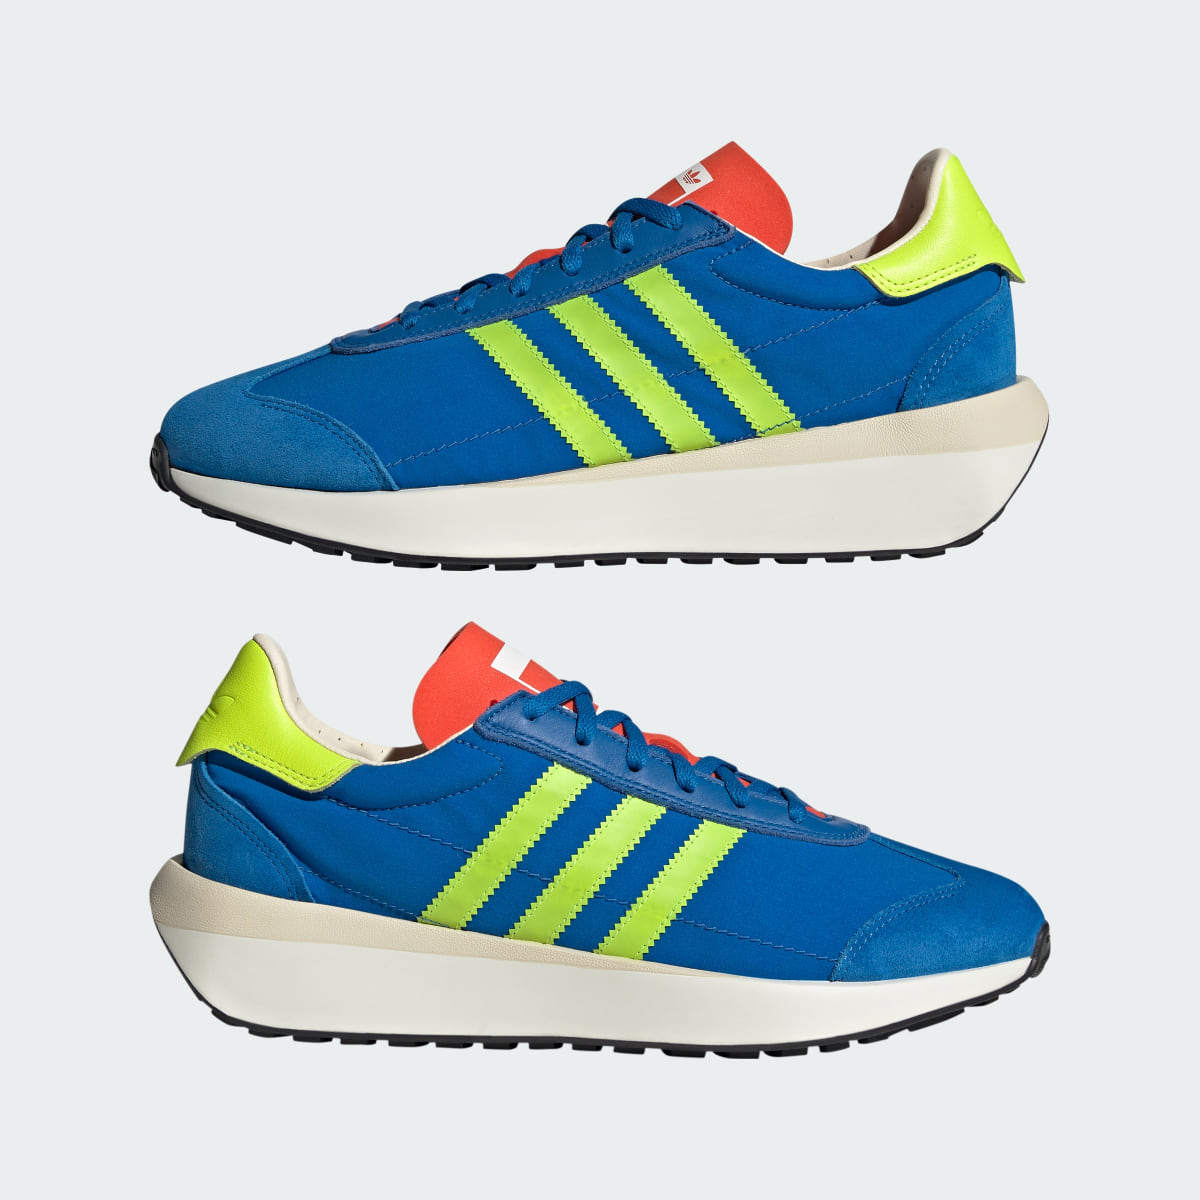 Adidas Sapatilhas Country XLG. 8